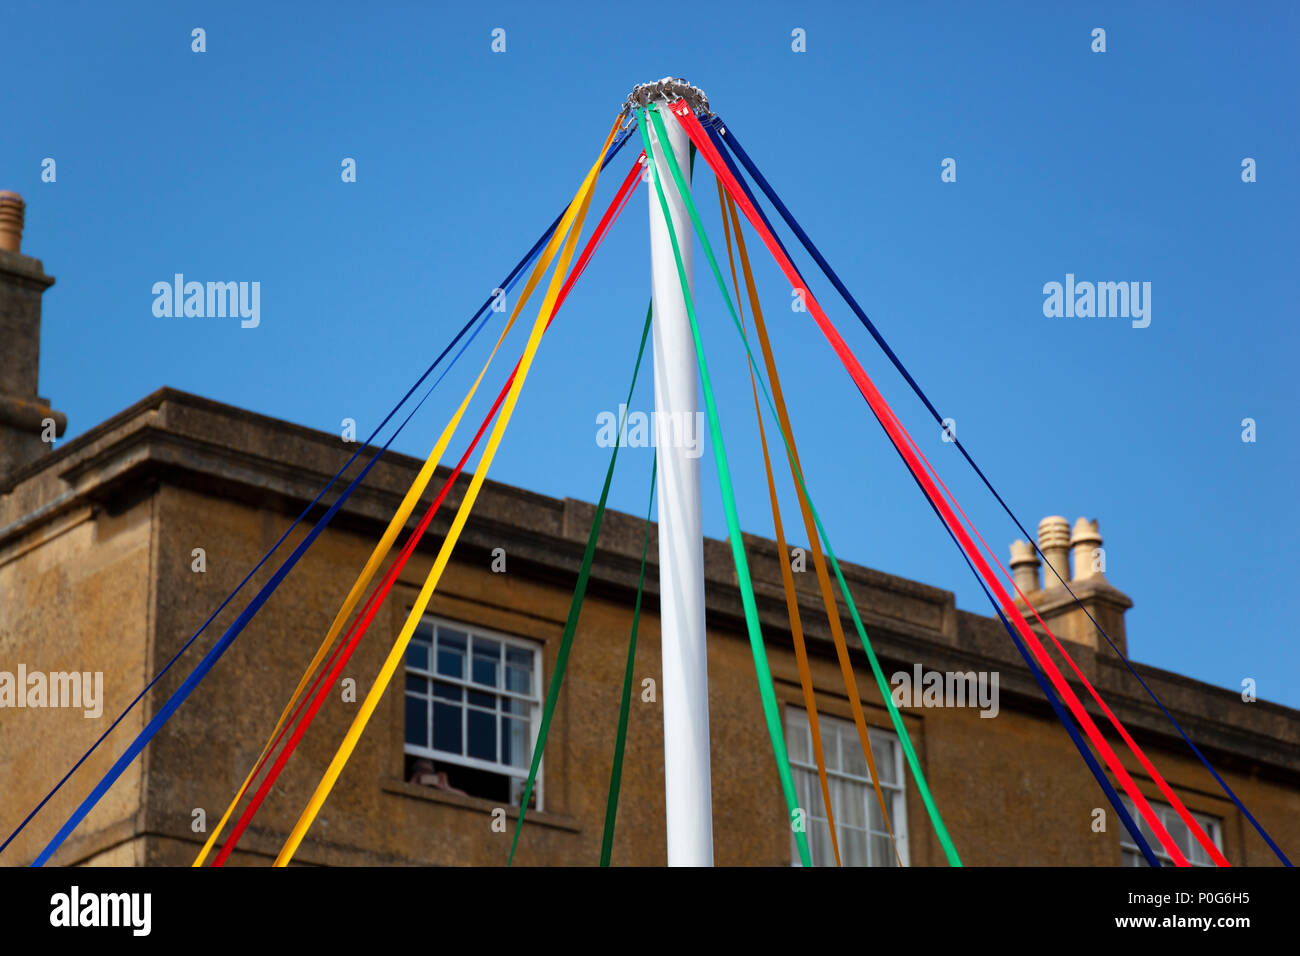 Colourful ribbons of maypole in front of cotswold stone building, Chipping Campden, Gloucestershire, England, United Kingdom, Europe Stock Photo